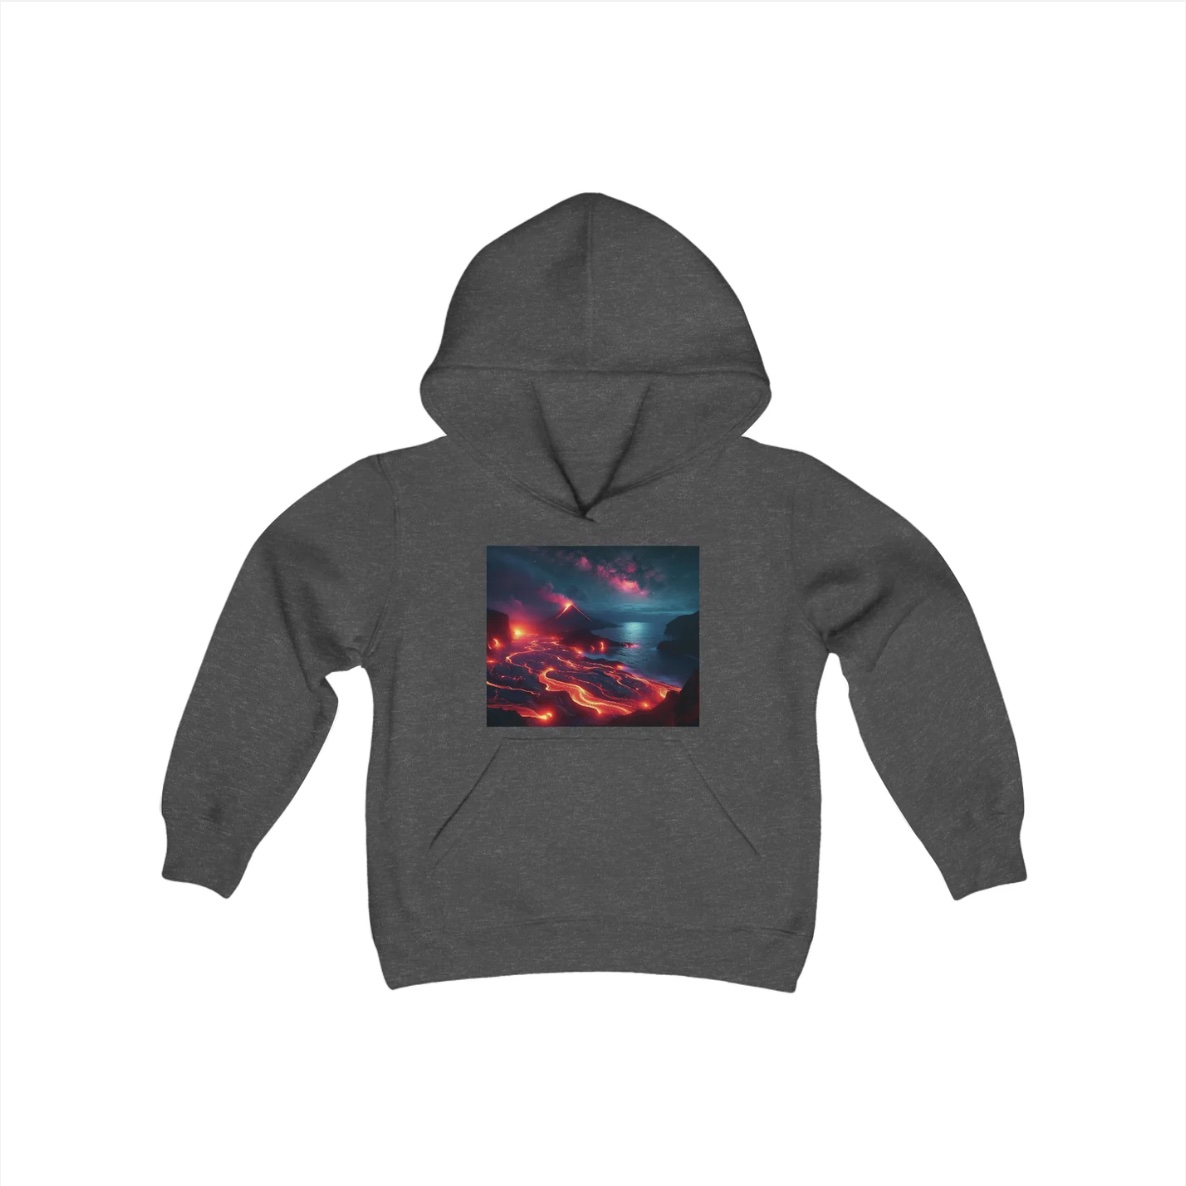 hoodie with volcano and lava